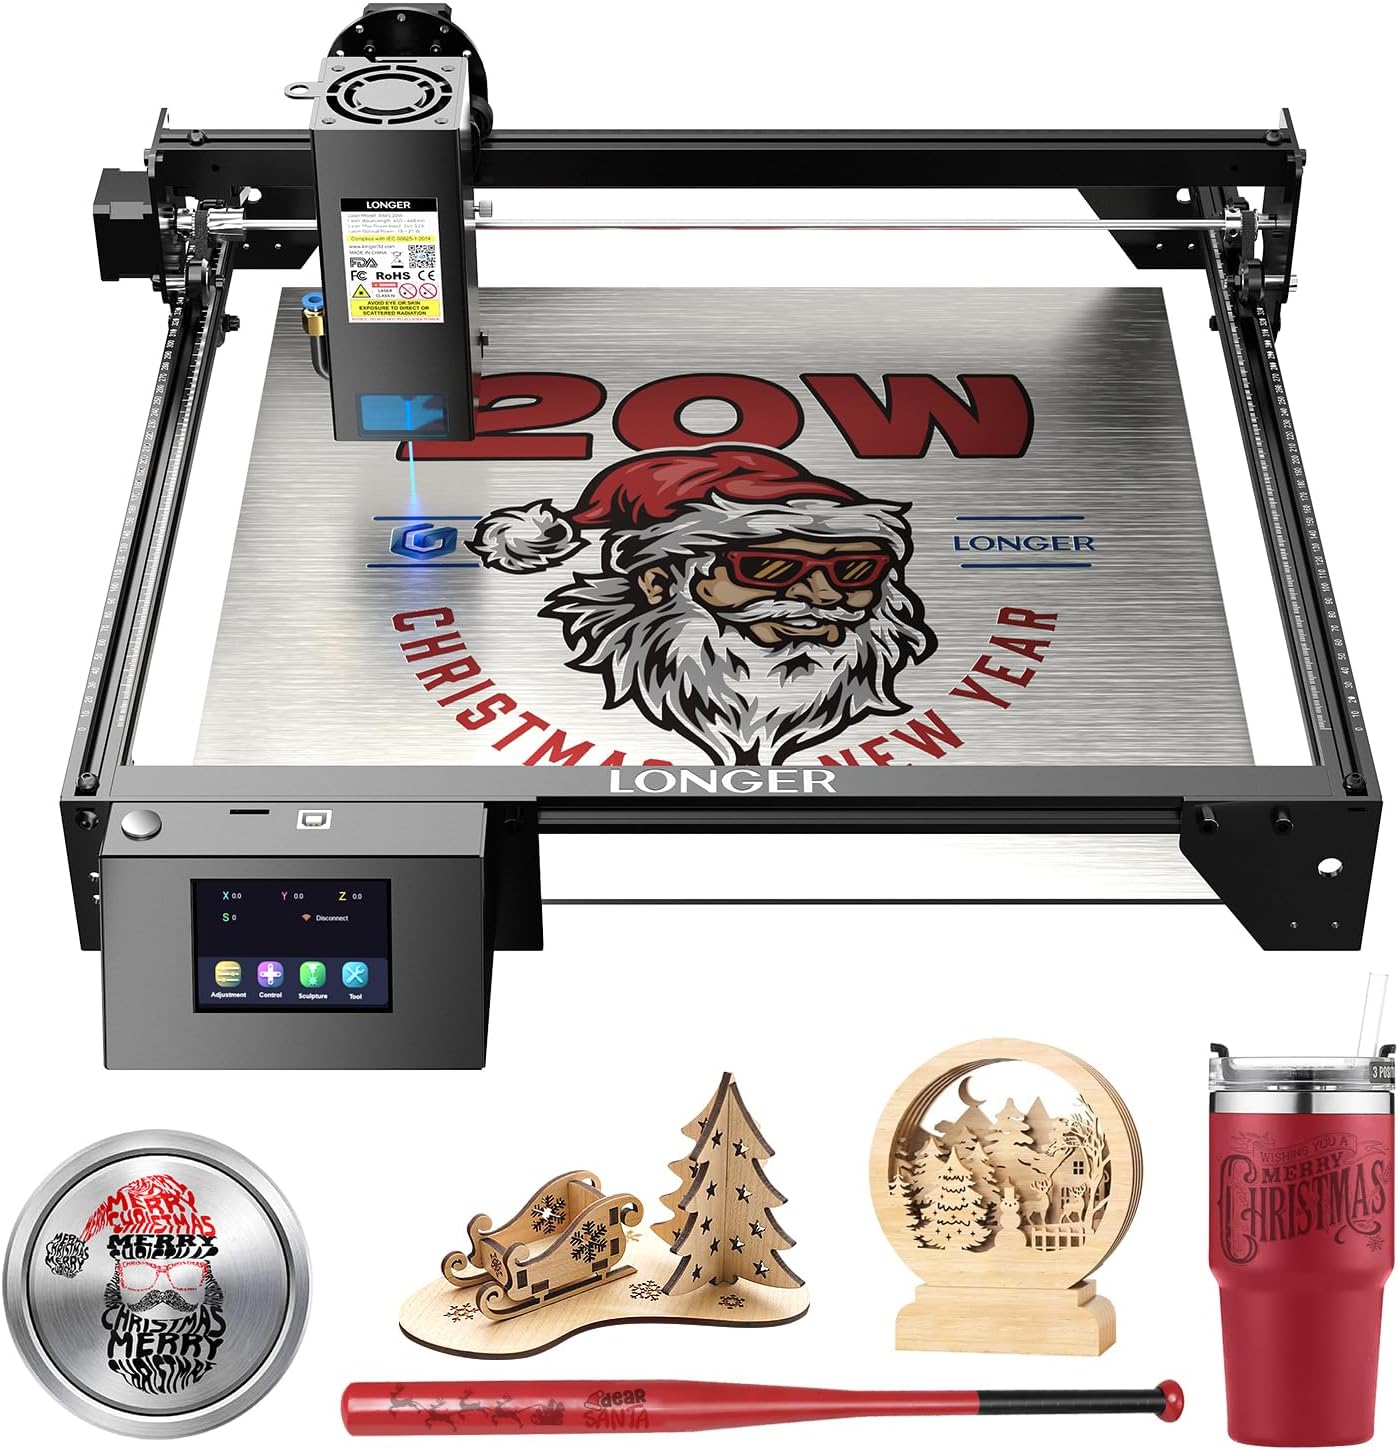 LONGER RAY5 20W Higher Accuracy Laser Engraver and Cutter, 130W Laser Engraving Cutting Machine can Cut 0.05mm Metal and Engrave Hundreds of Colors On Metal Steel 3.5"Touch Screen for DIY